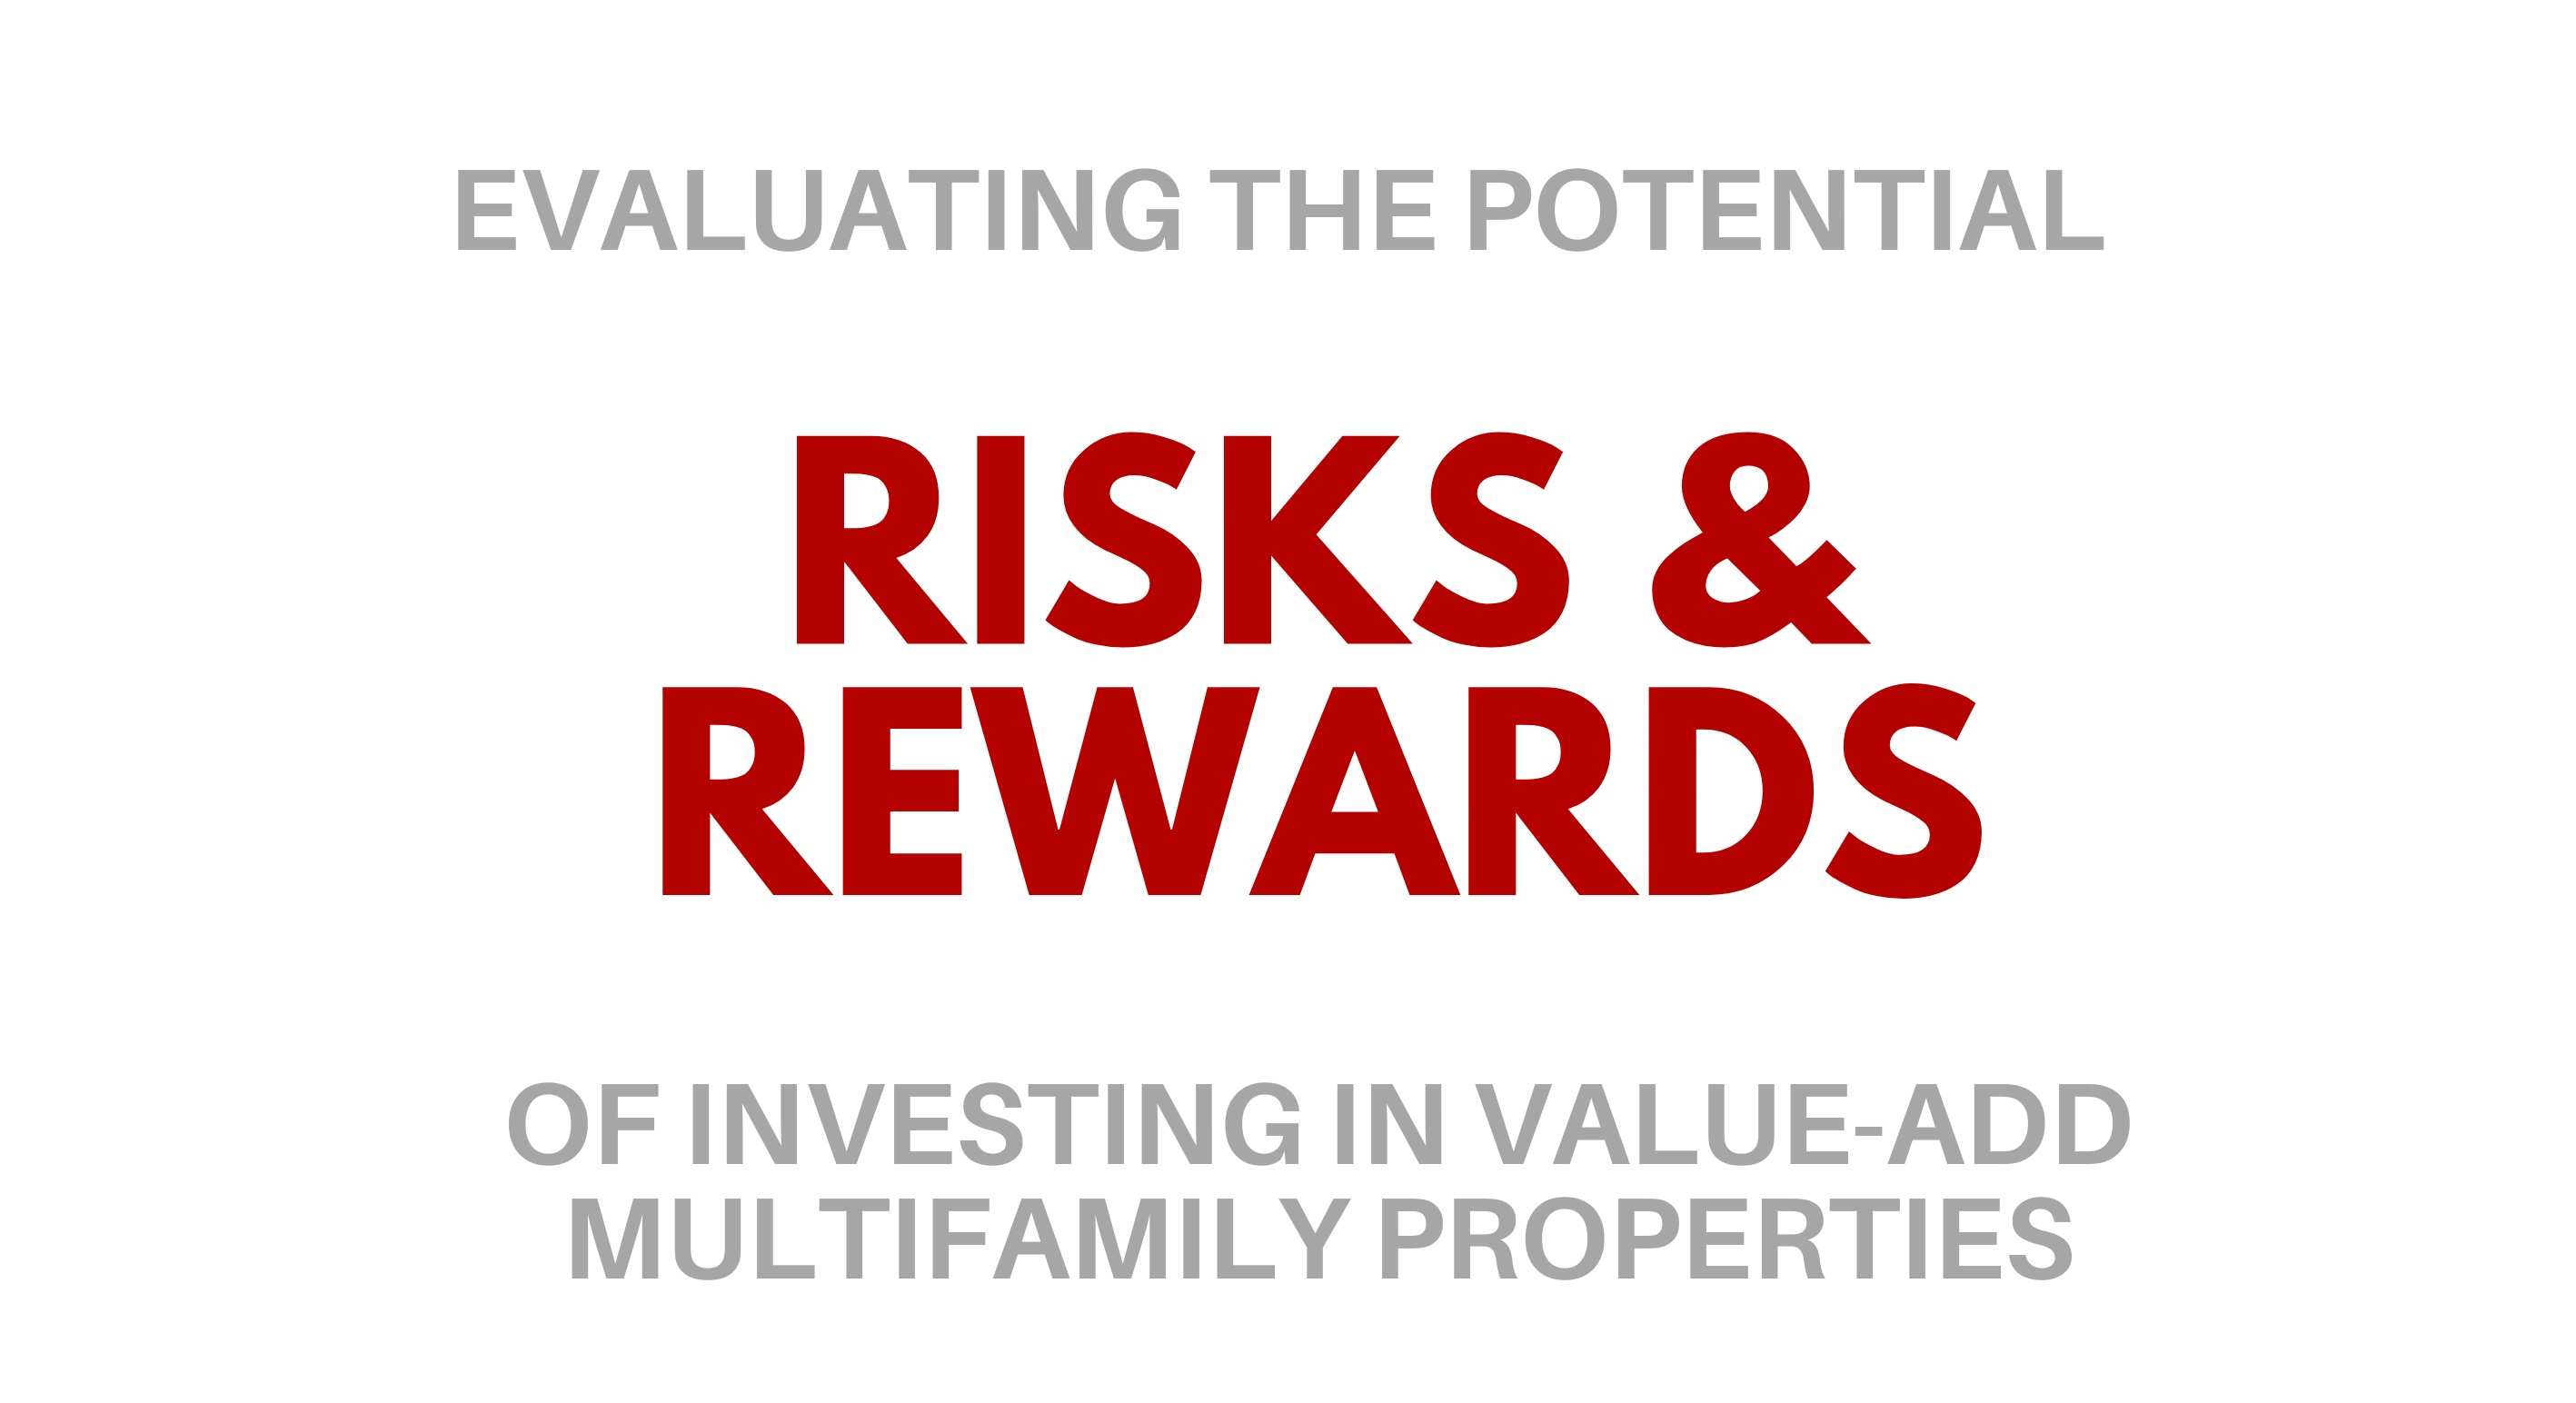 Evaluating the potential risks and rewards of investing in value-add multifamily properties